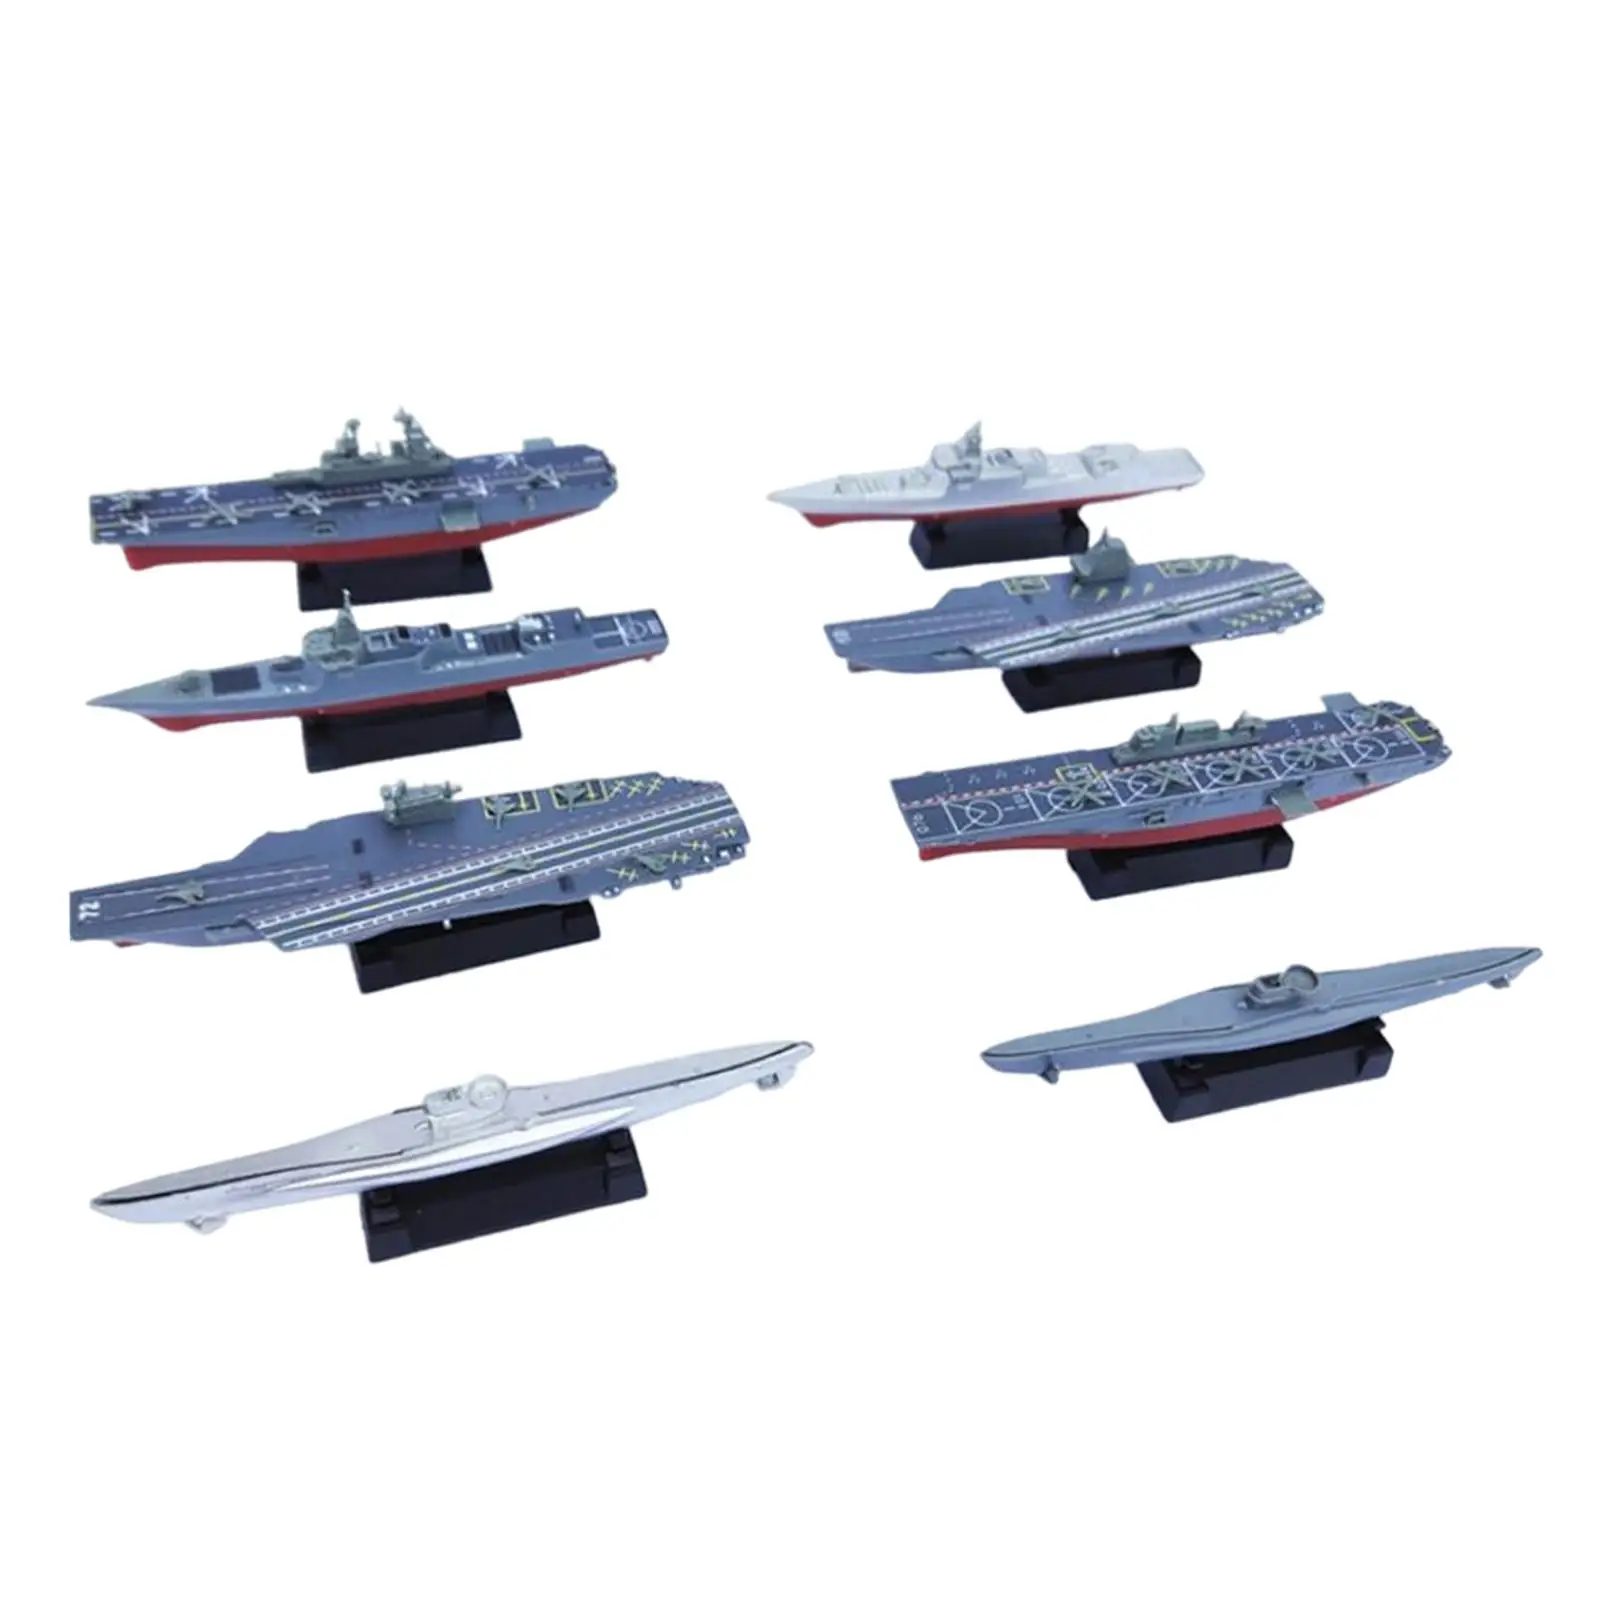 

8x Warship Model Toy Jigsaw Toys Playset Collection Warships Ship Set Aircraft Carrier Toy for Adults Girls Children Boys Gifts